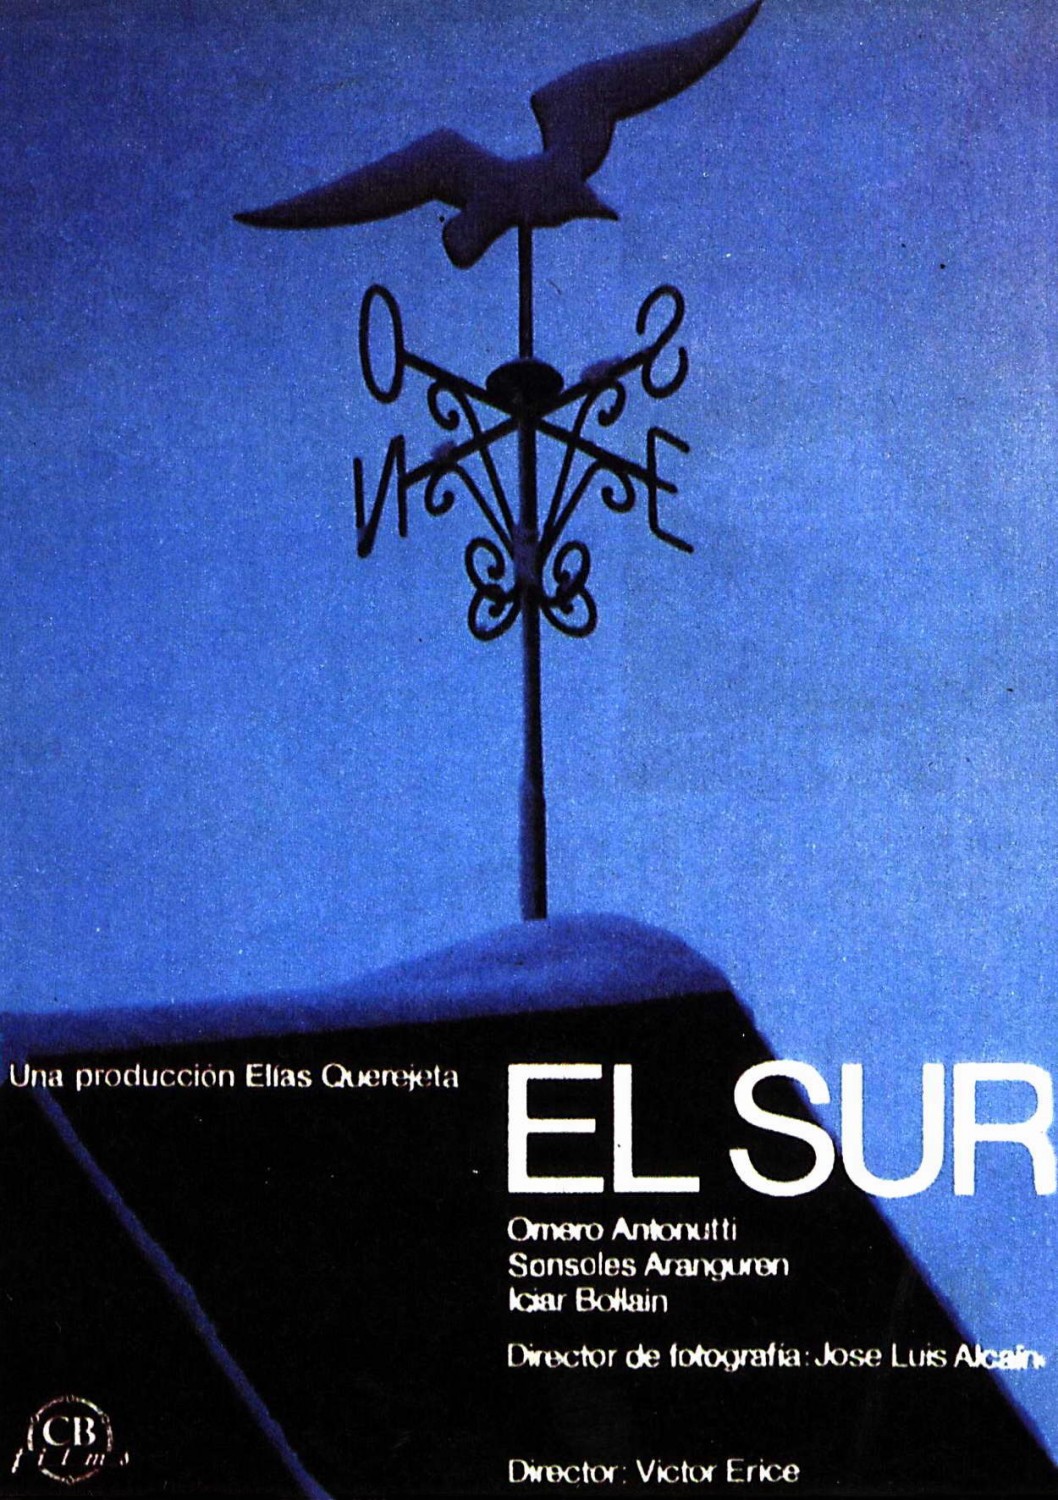 Extra Large Movie Poster Image for El sur 